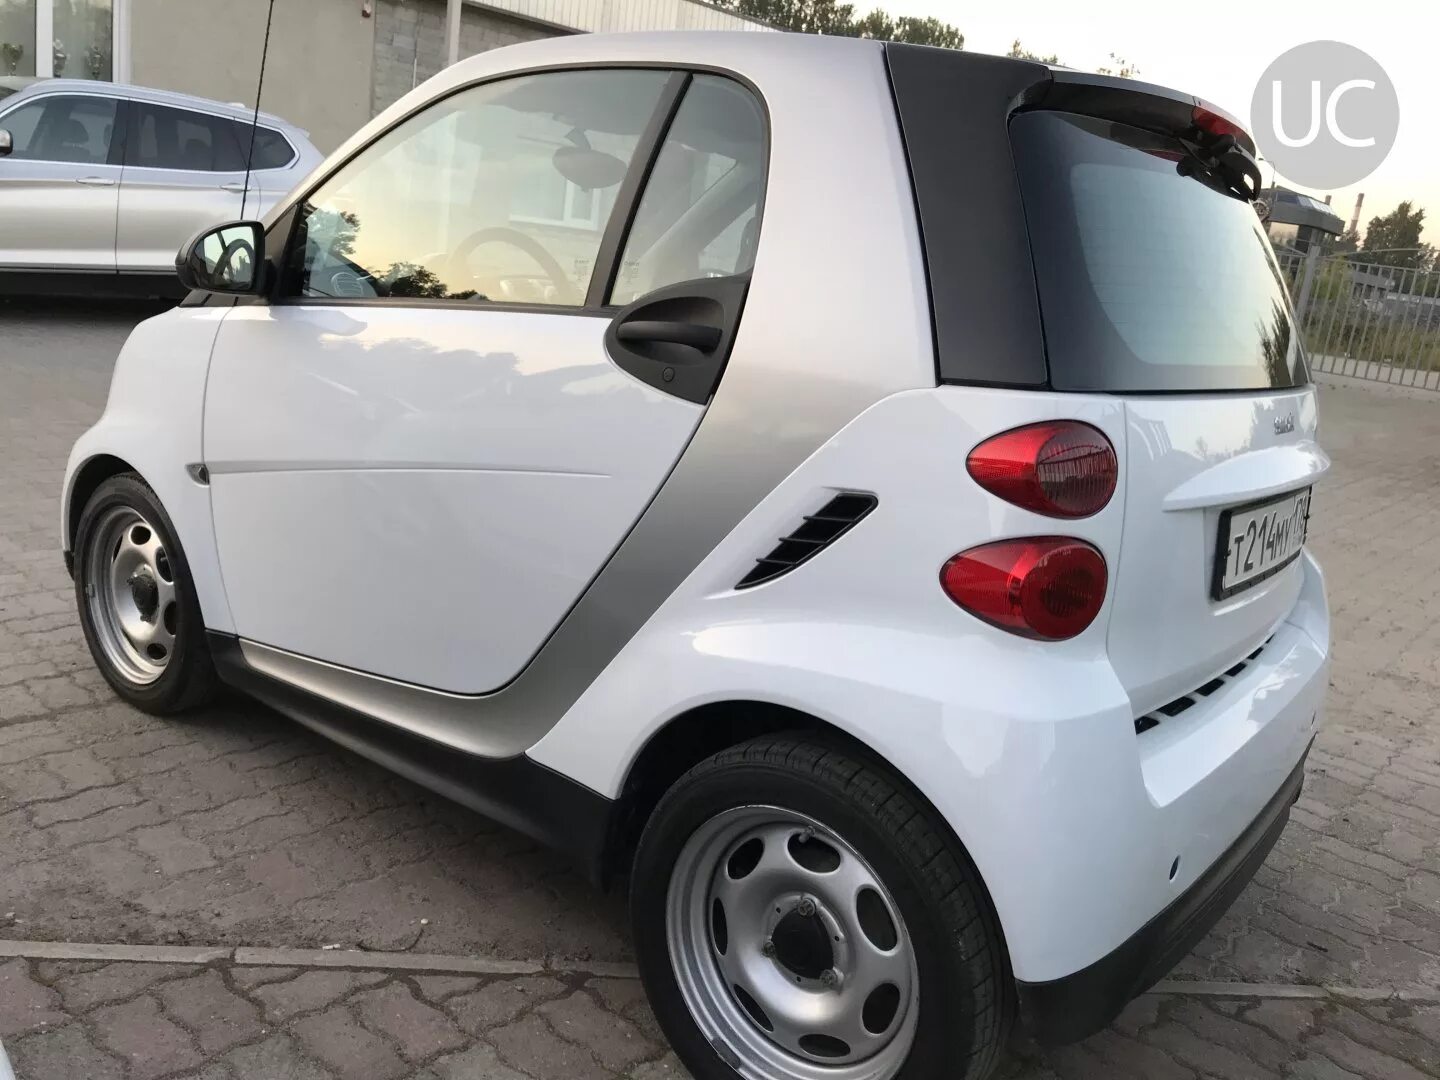 Smart Fortwo 2015. Mercedes Smart Fortwo 2015. Smart Fortwo p111f. Benz Smart Fortwo 2015-2017.